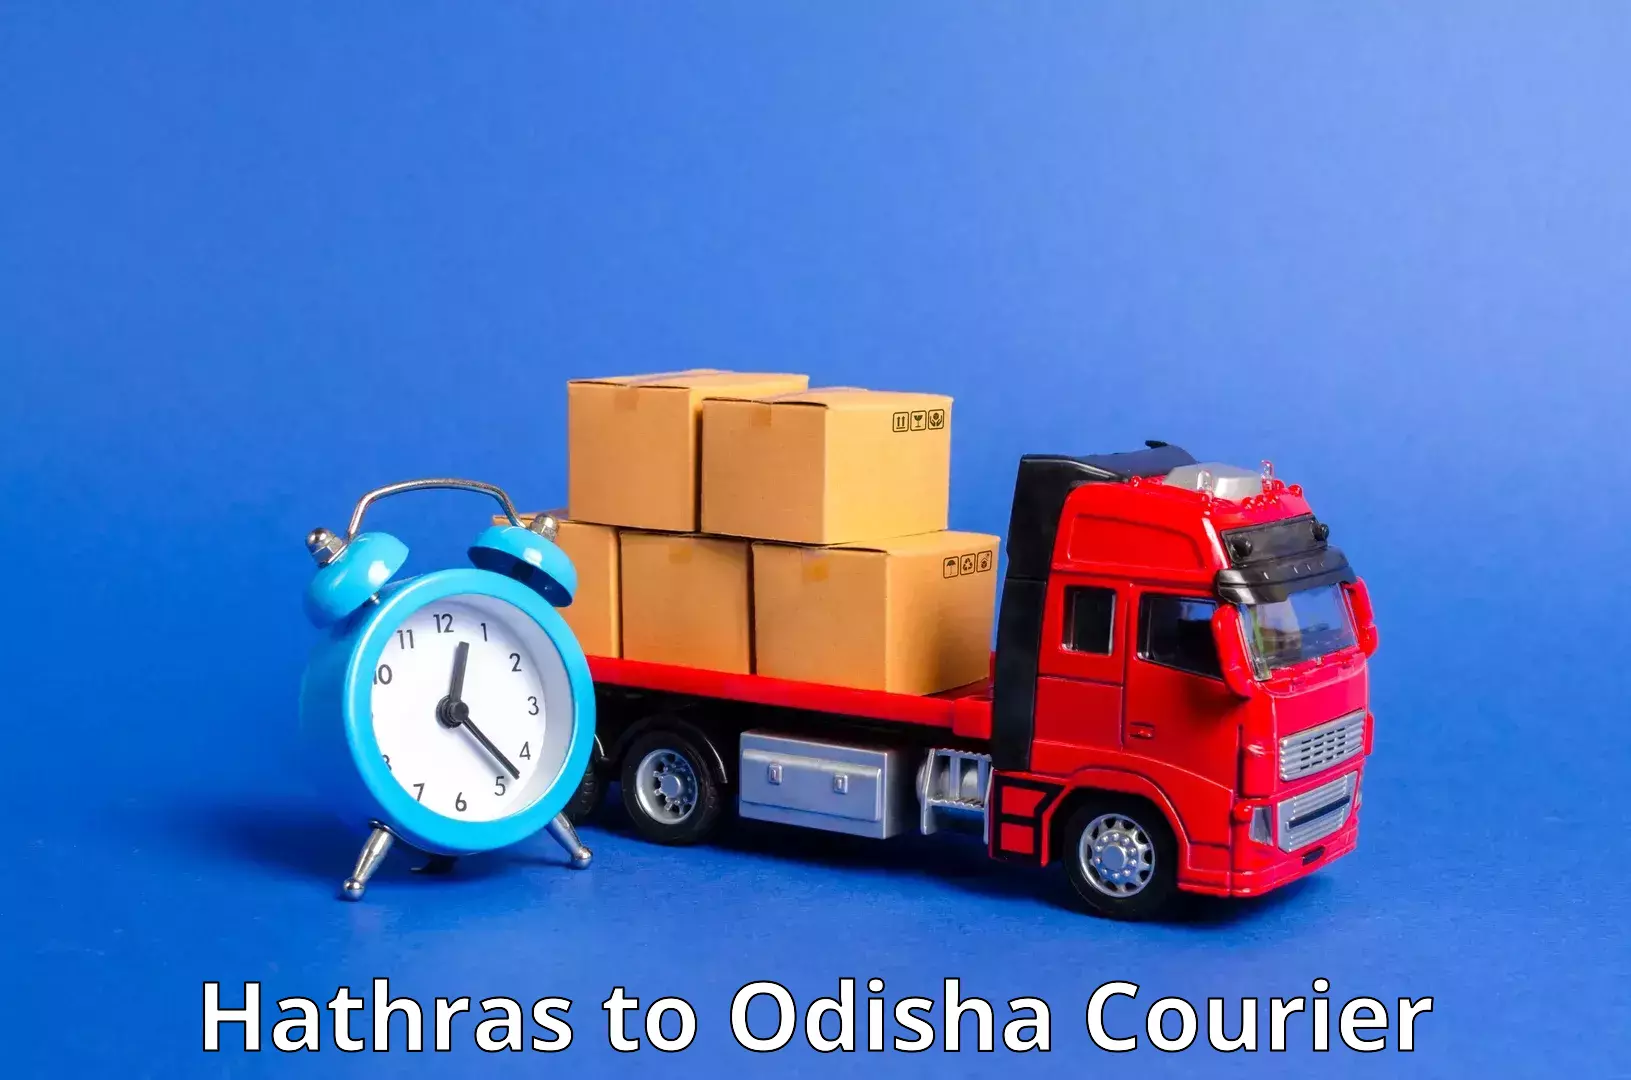 Scheduled delivery Hathras to Dandisahi